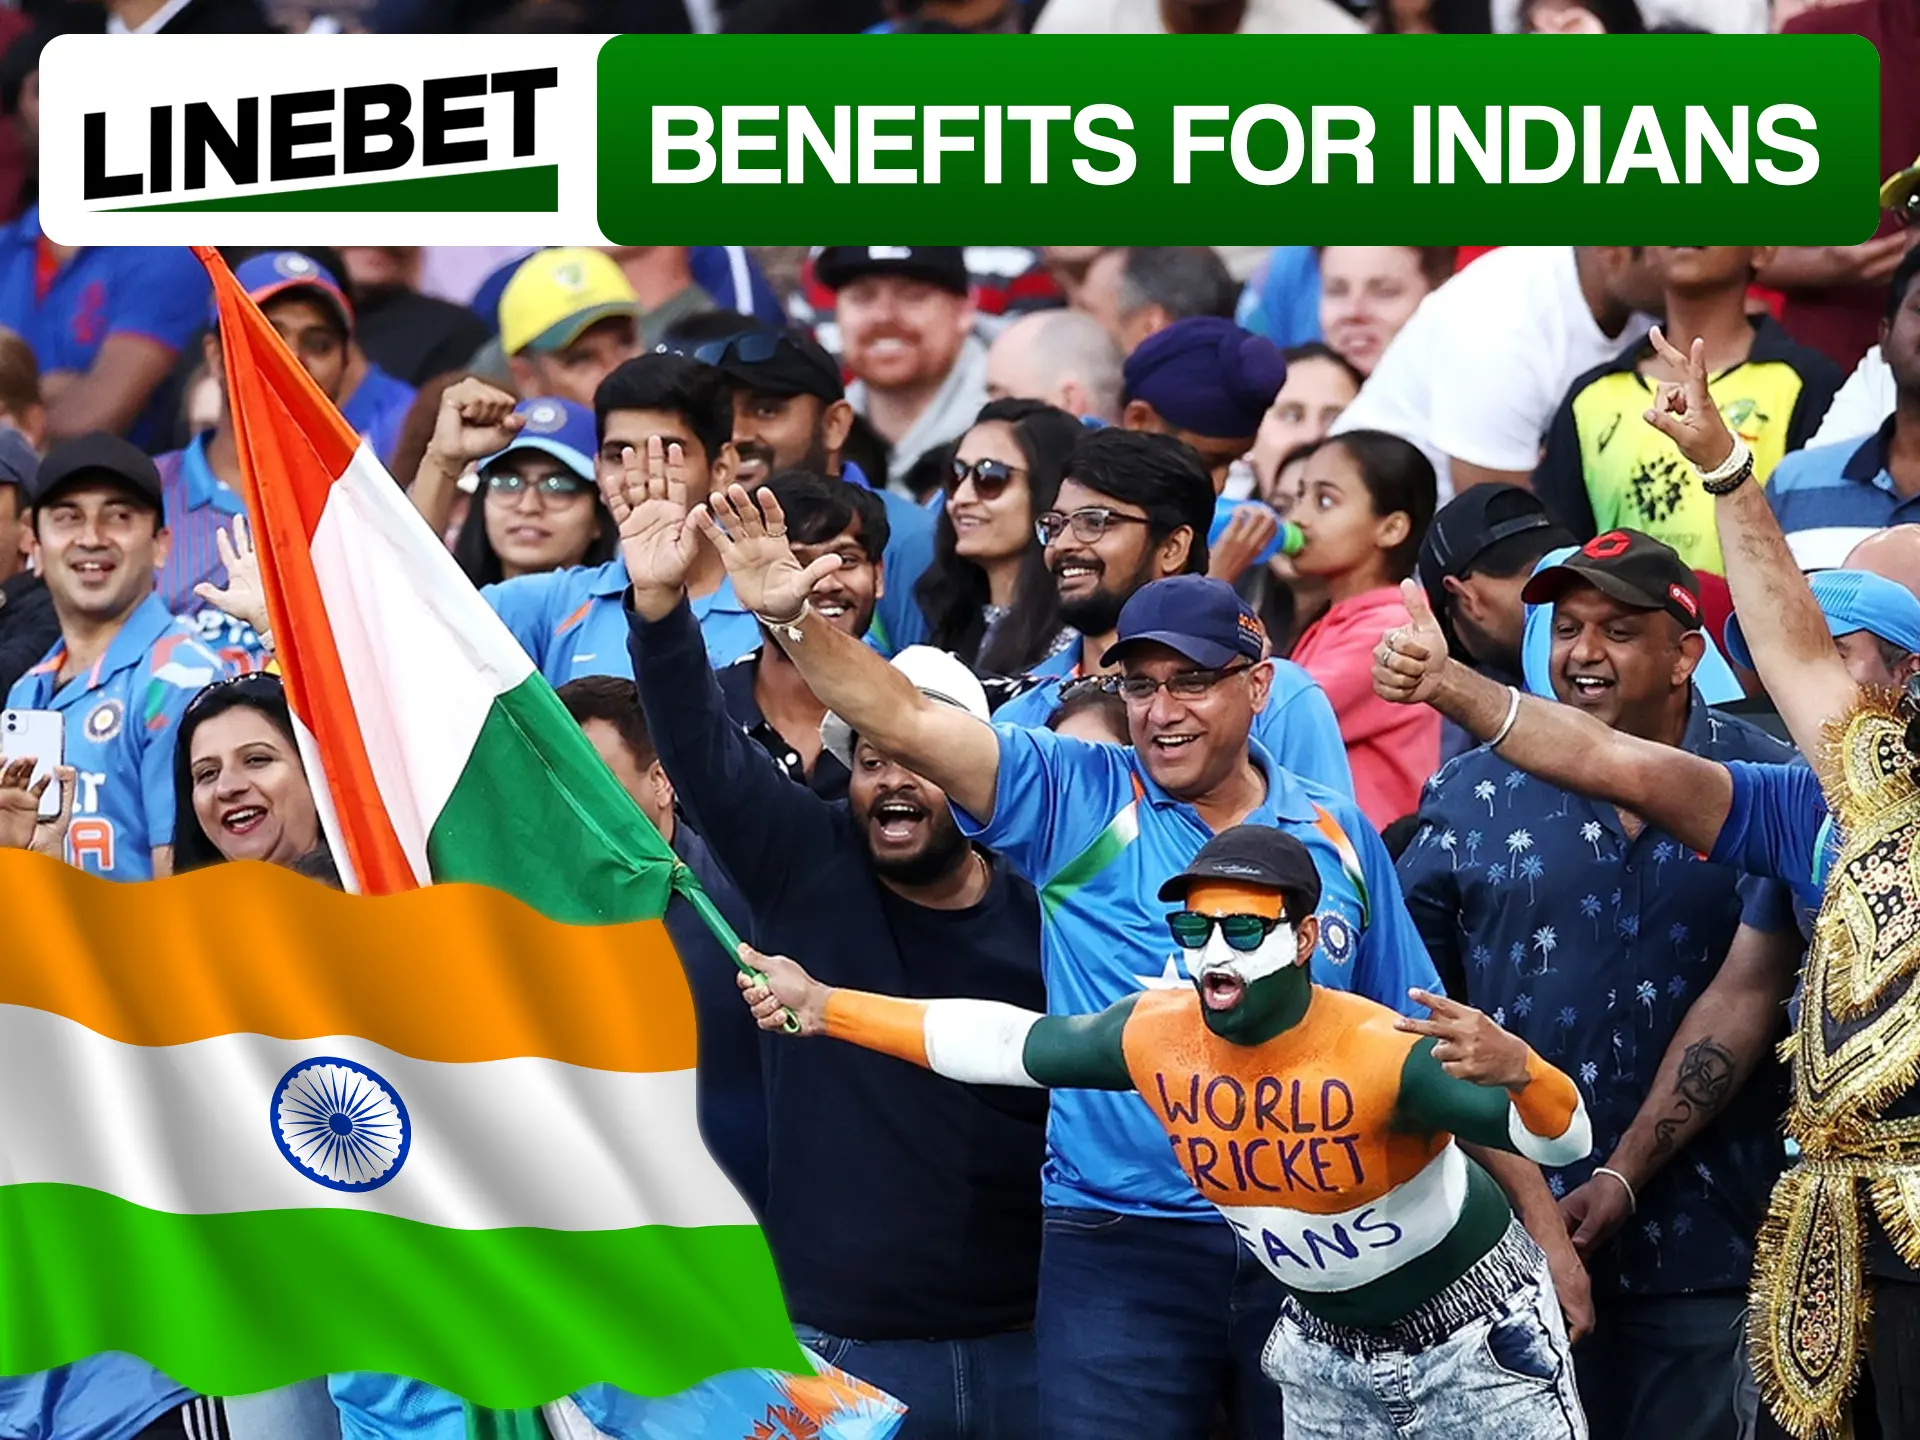 Get additional Linebet bonuses if you bet from India.